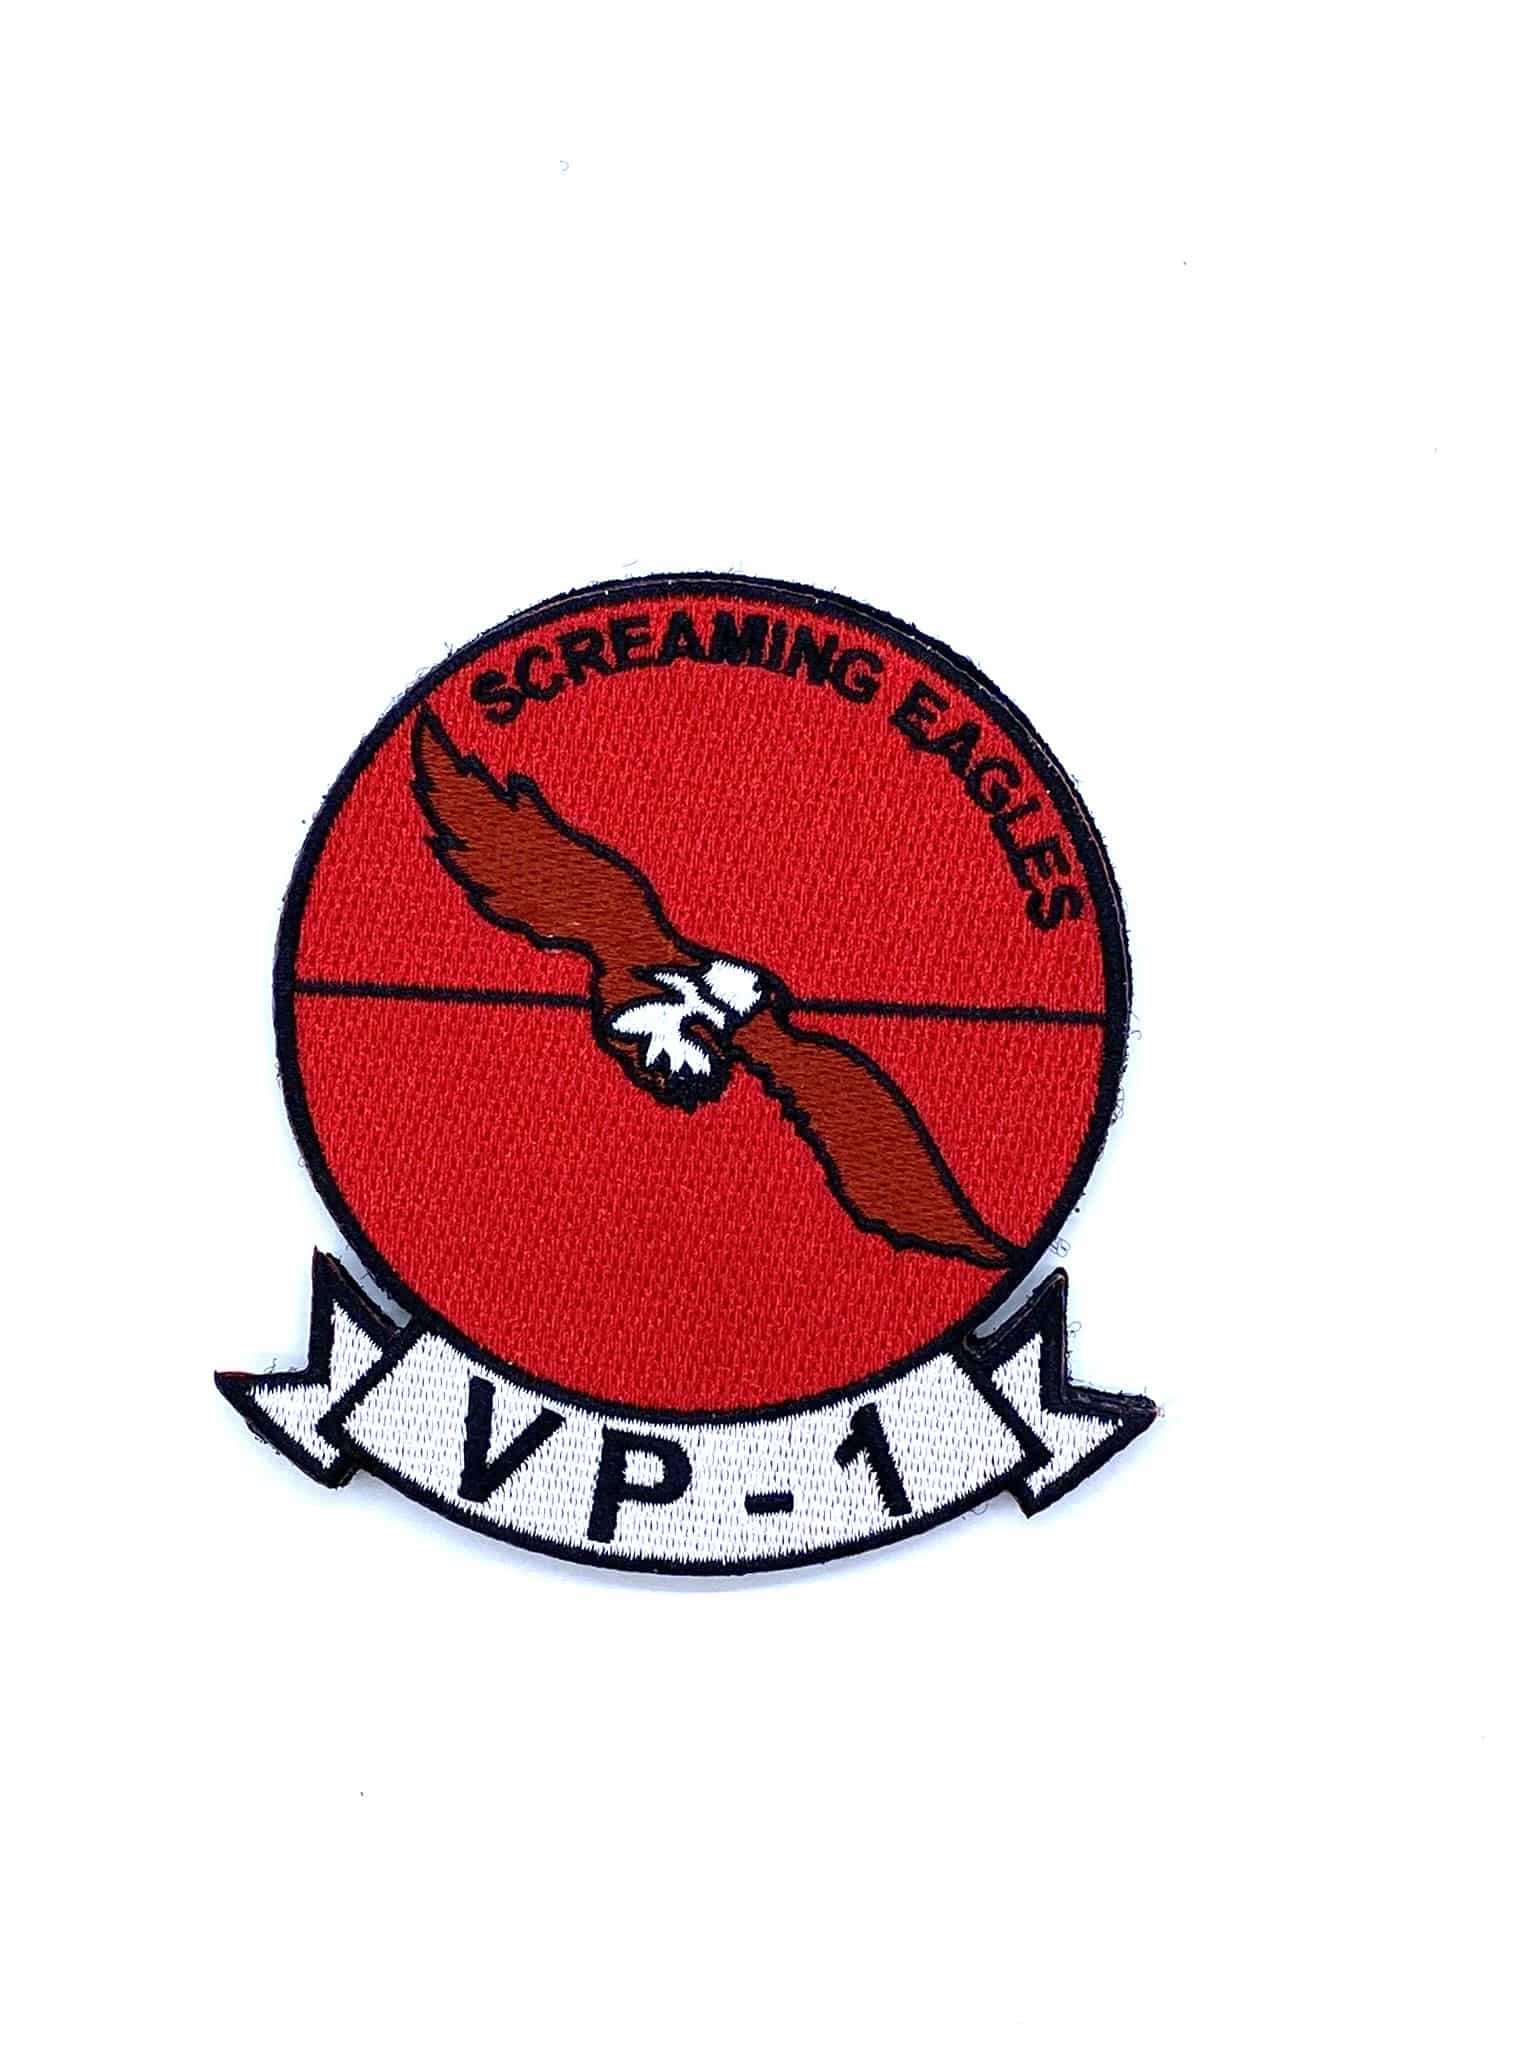 VP-1 Screaming Eagles Throwback Patch – With Hook and Loop